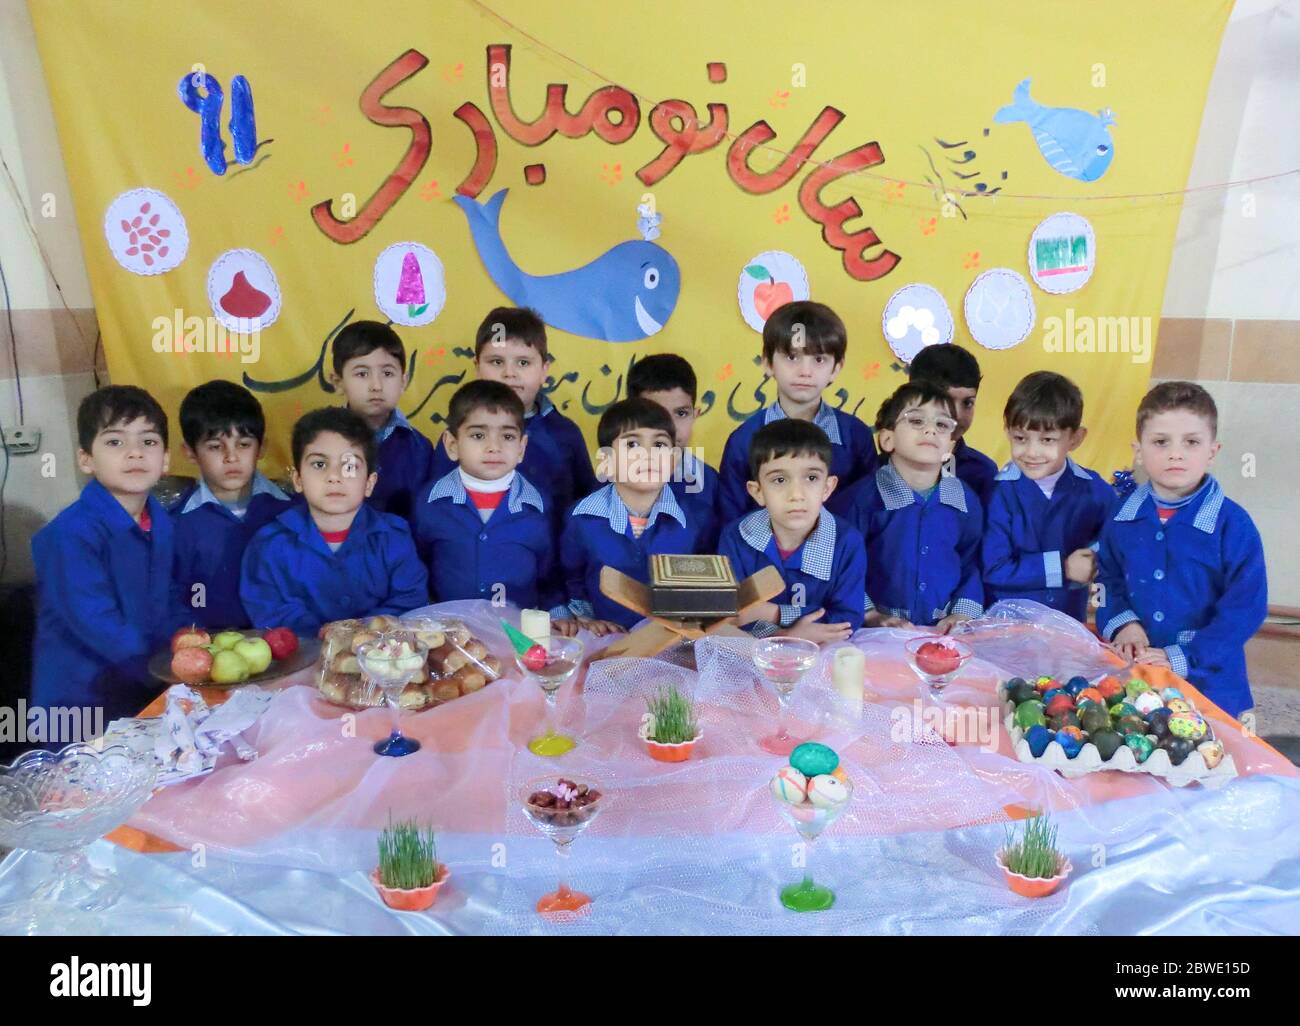 Rasht, Gilan, Iran, 05 05 2019. New Year's Eve Celebration at Boys' School in Iran. School students by Nowruz table. Students in school uniform at New Stock Photo